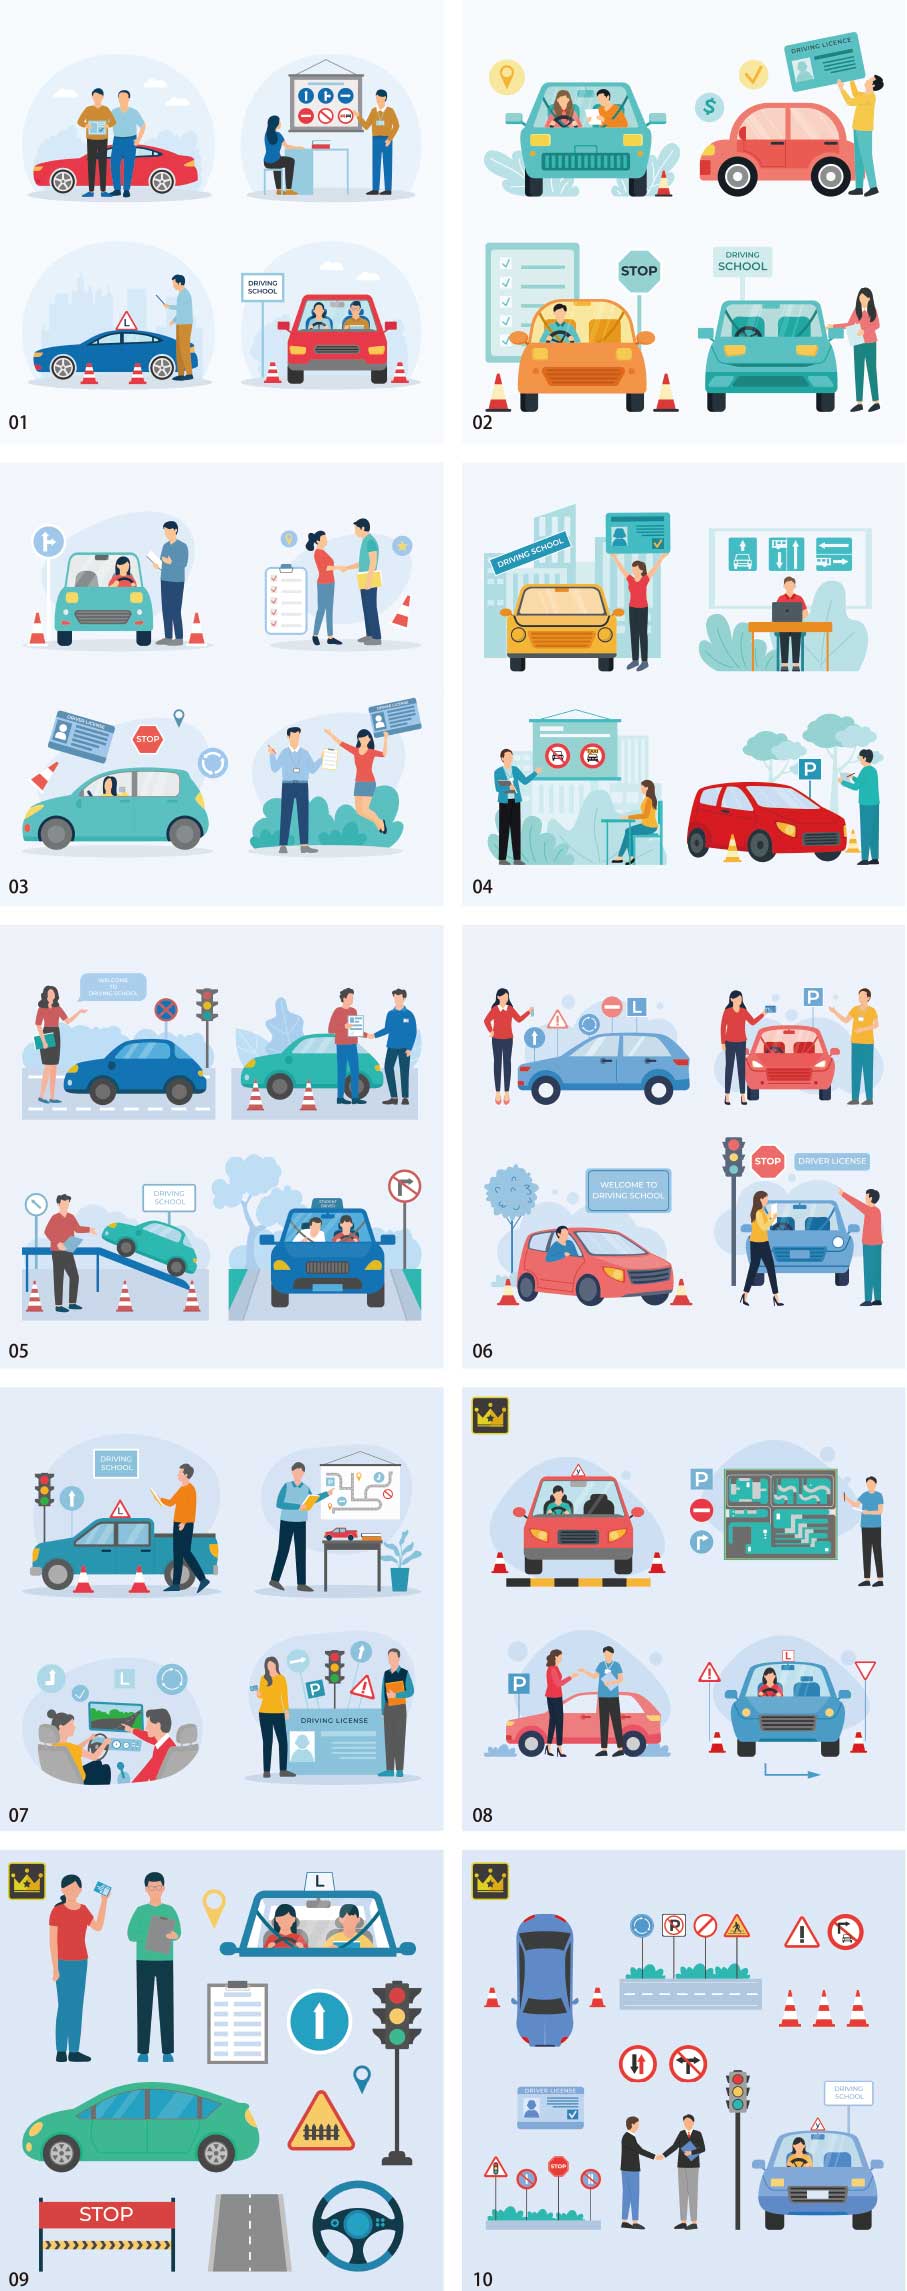 Driving school illustration collection